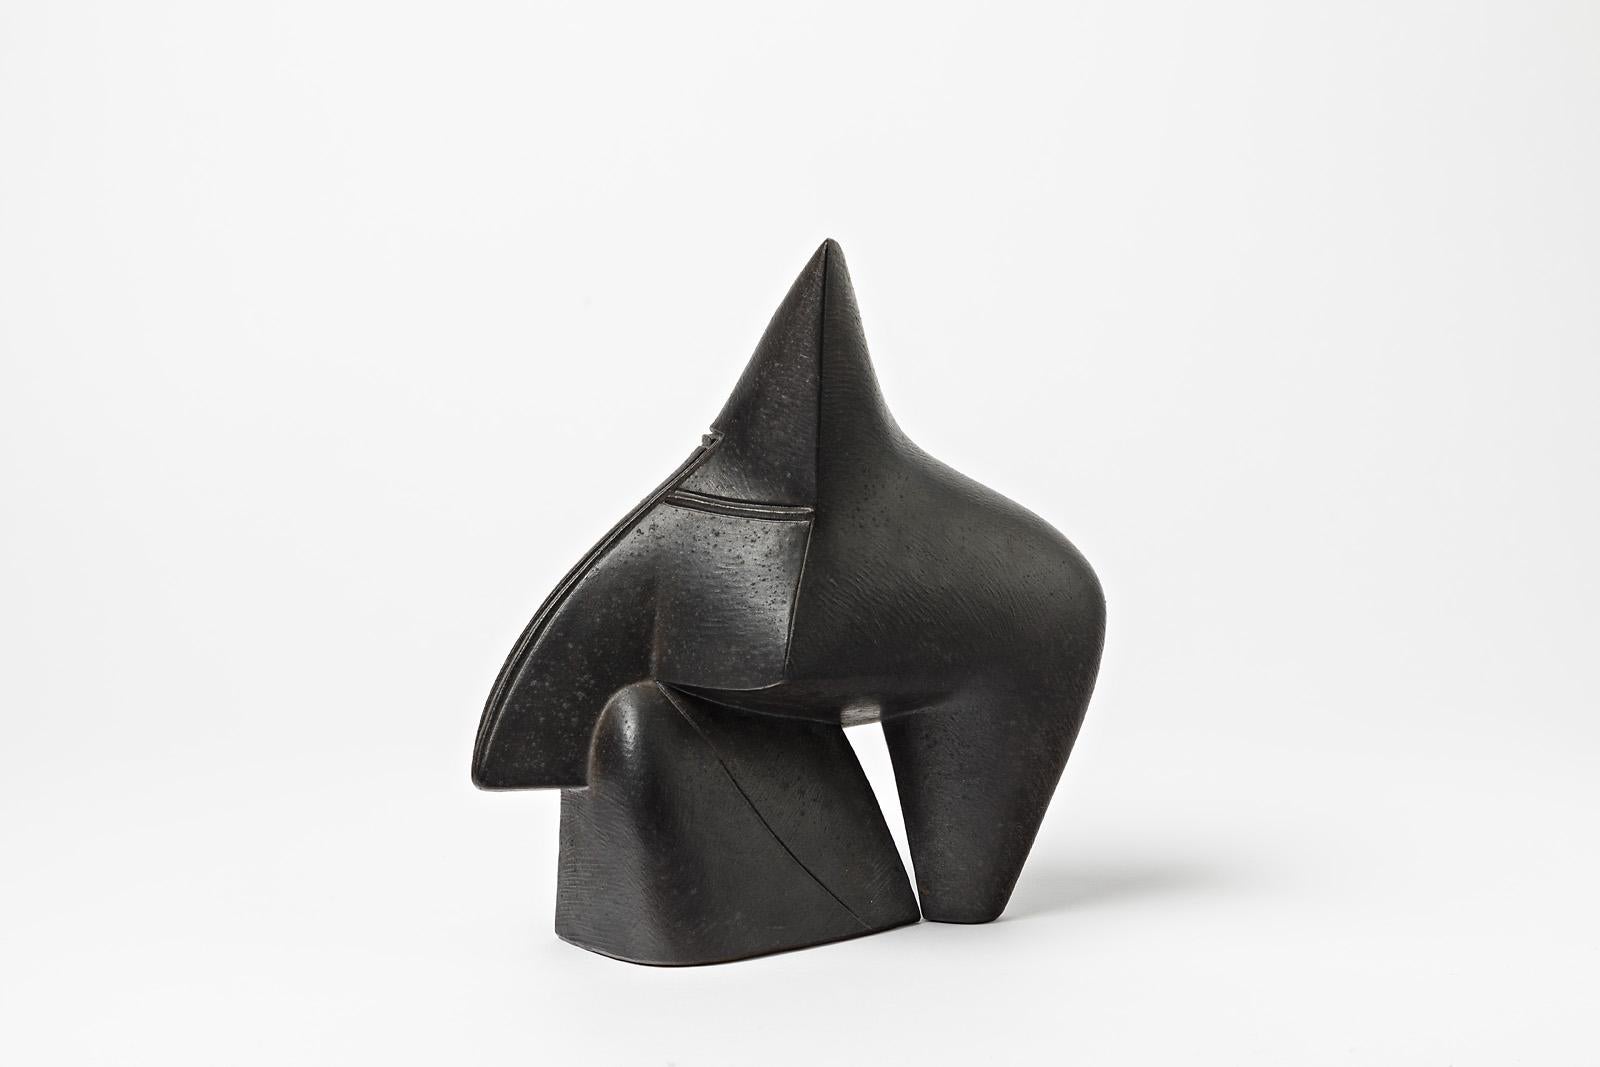 An unique ceramic sculpture with black glaze decoration by Pierre Martinon.
Perfect original conditions.
Signed at the base 